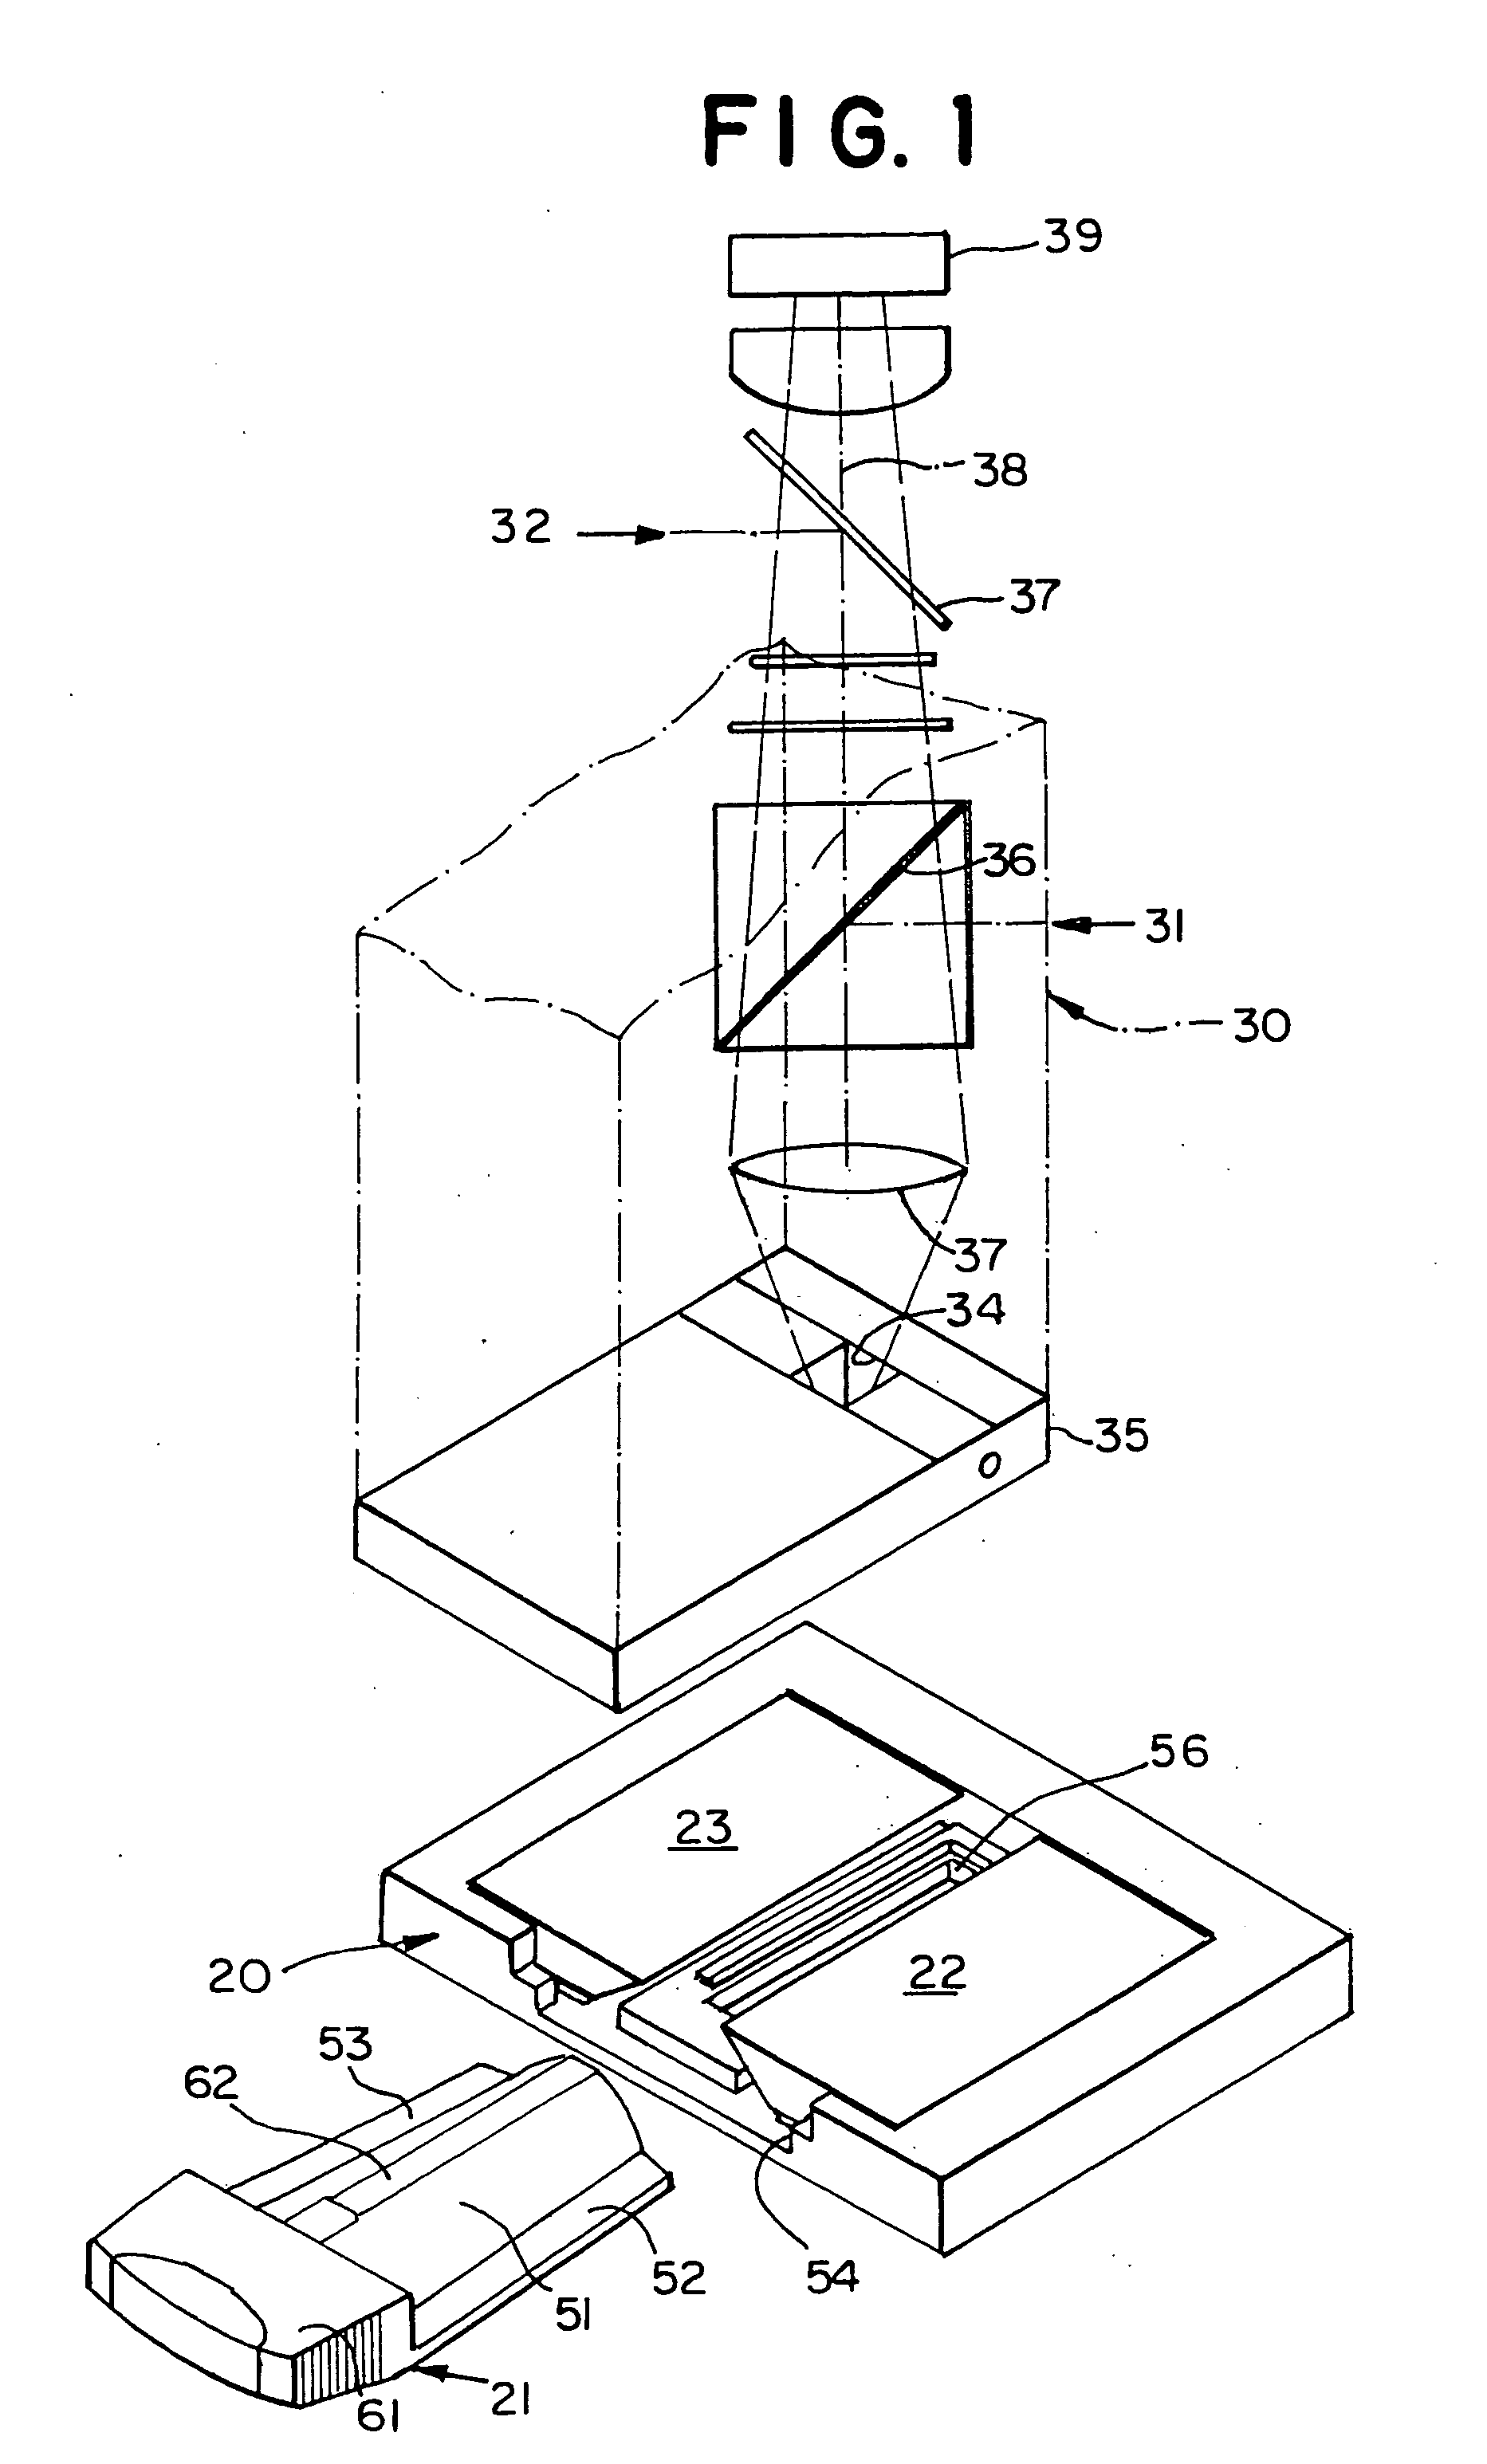 Cartridge for containing a specimen sample for optical analysis